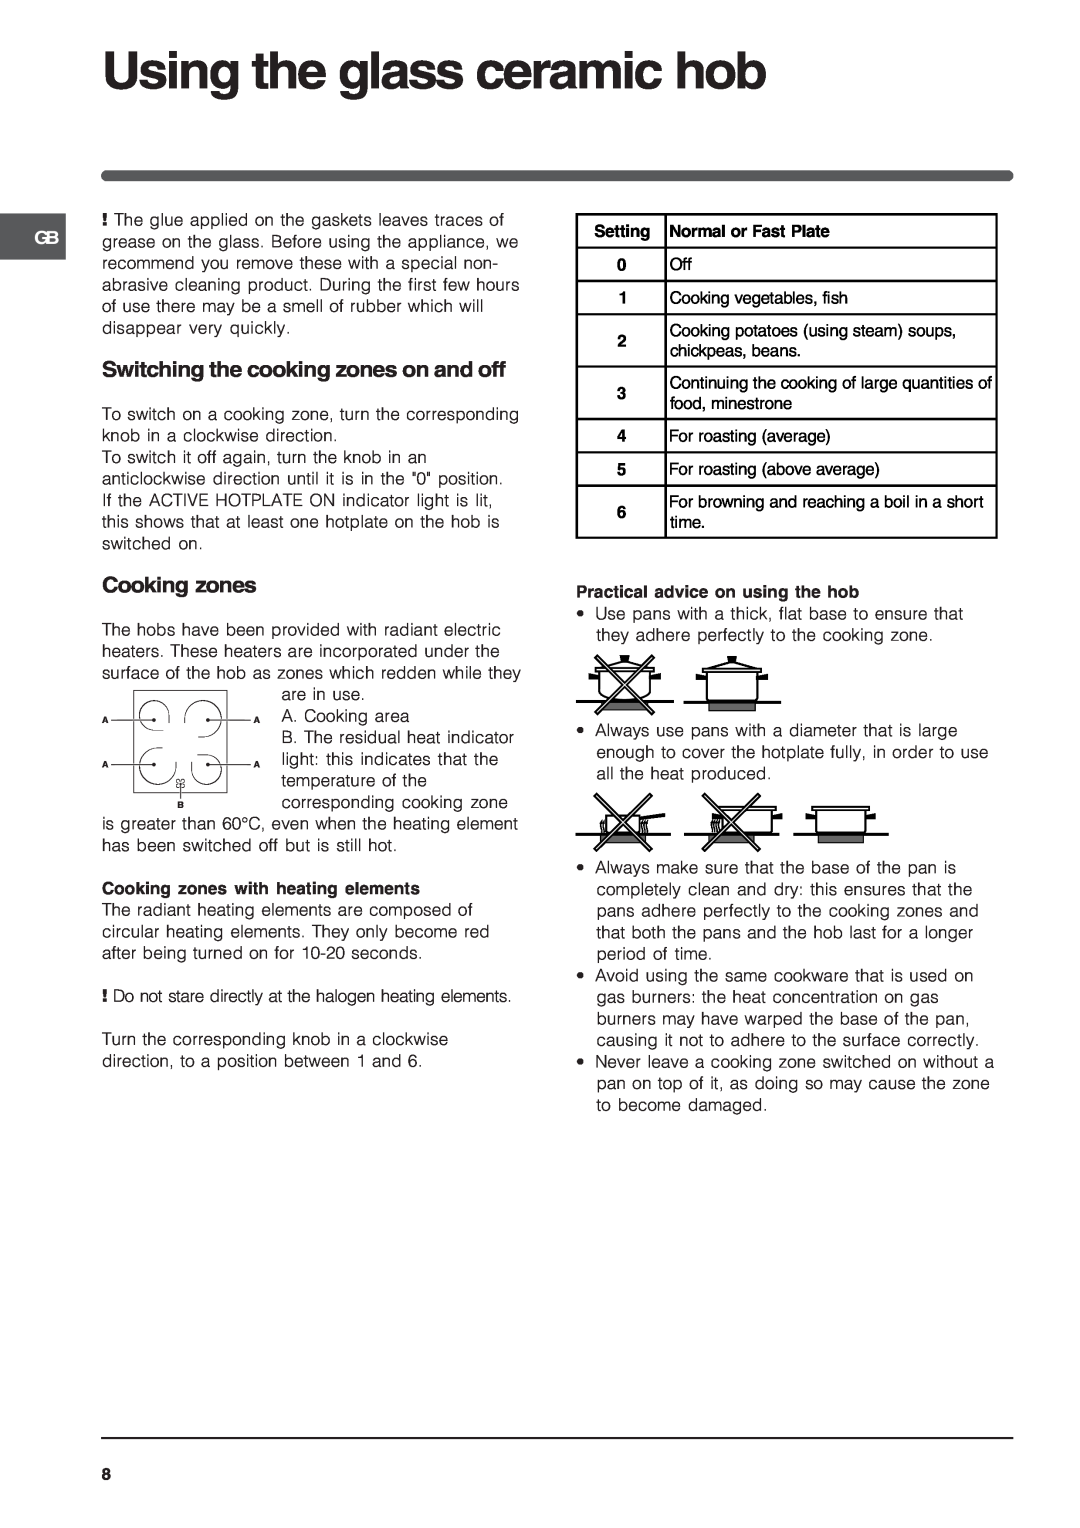 Indesit K6C32/G operating instructions Using the glass ceramic hob, Switching the cooking zones on and off, Cooking zones 